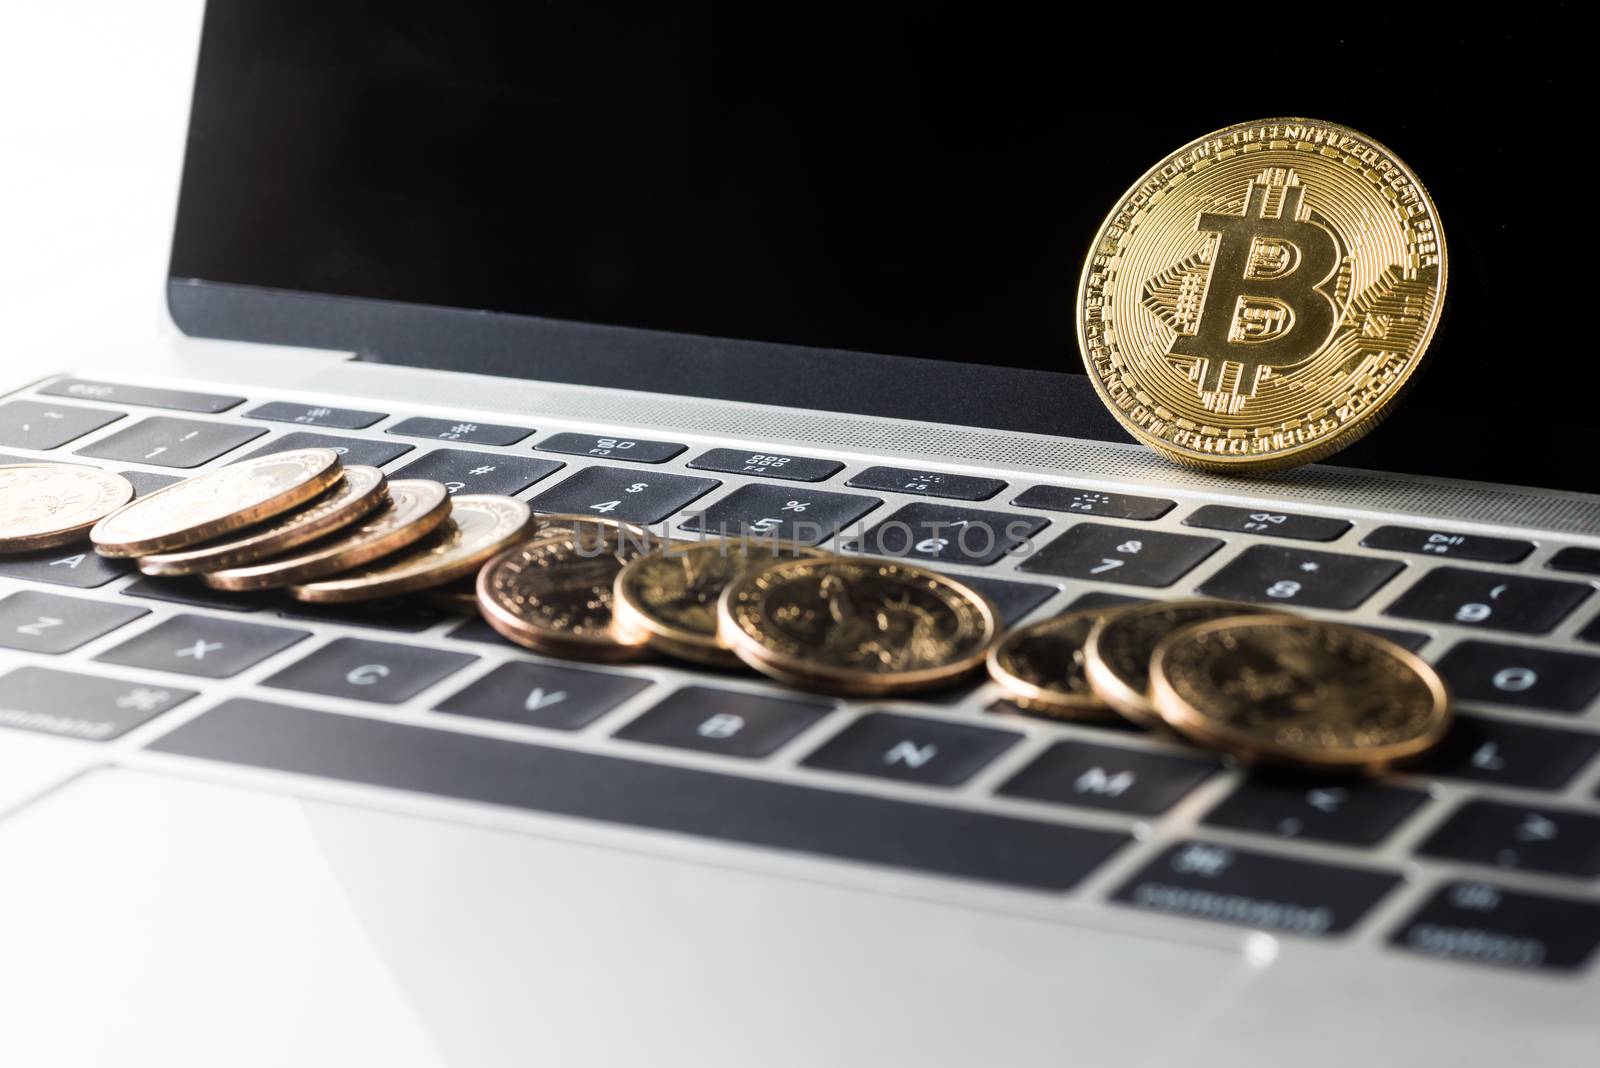 Cryptocurrency golden bitcoin and dollars money on laptop computer, digital currency concept